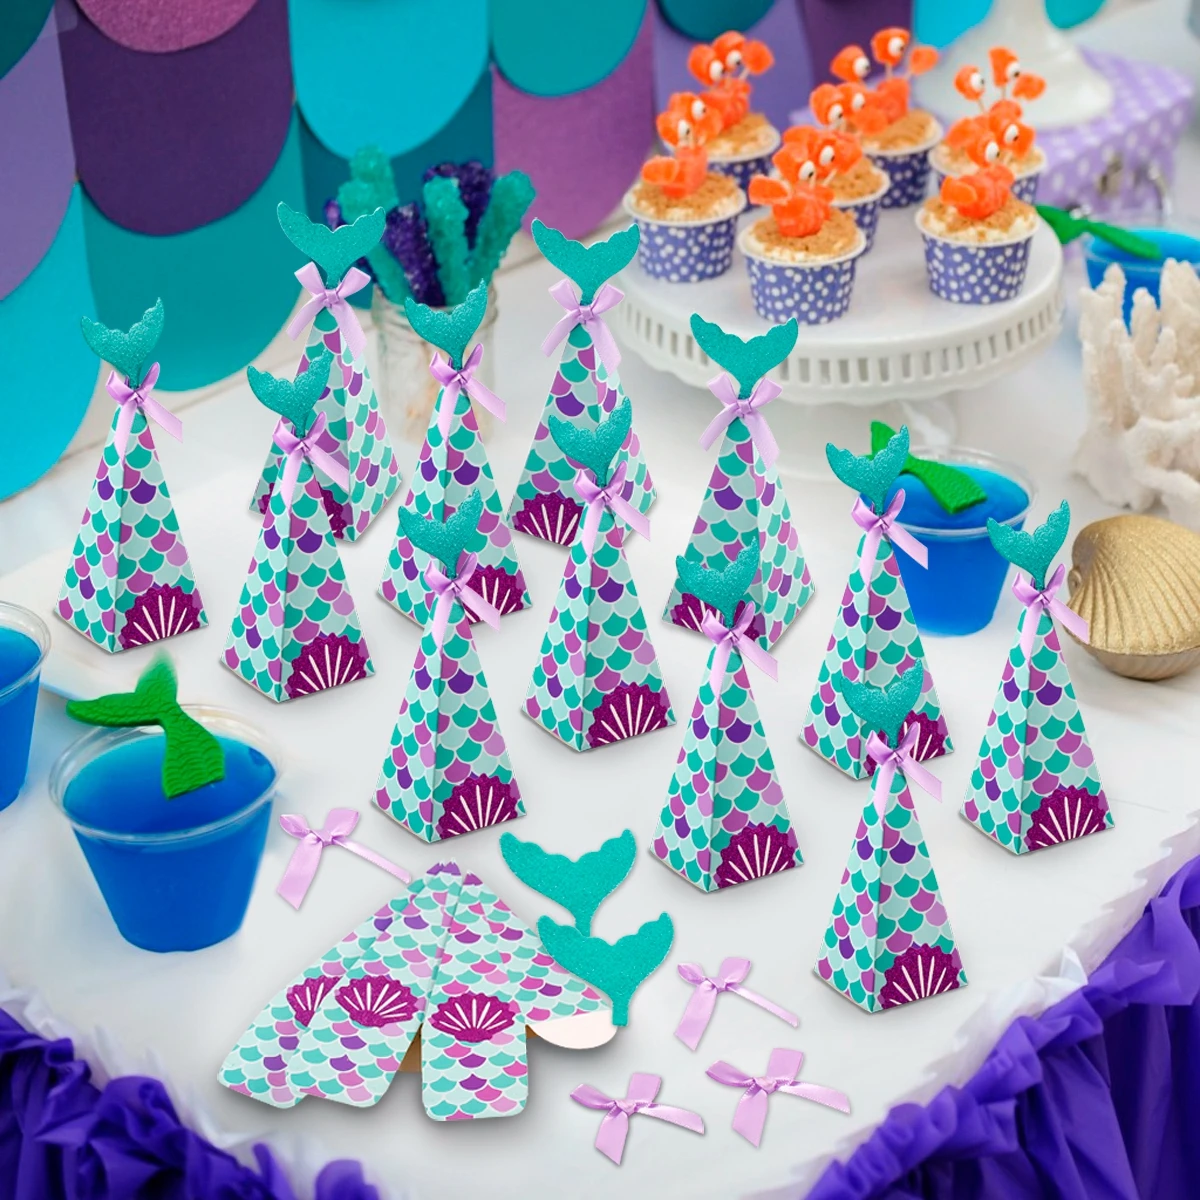 https://ae01.alicdn.com/kf/Hc5891e1b6cf74cae8397fc79b2b3b88a4/Little-Mermaid-Disposable-Tableware-Fish-Tail-Mermaid-Birthday-Party-Decorations-Baby-Shower-1st-Birthday-Girl-Party.jpg